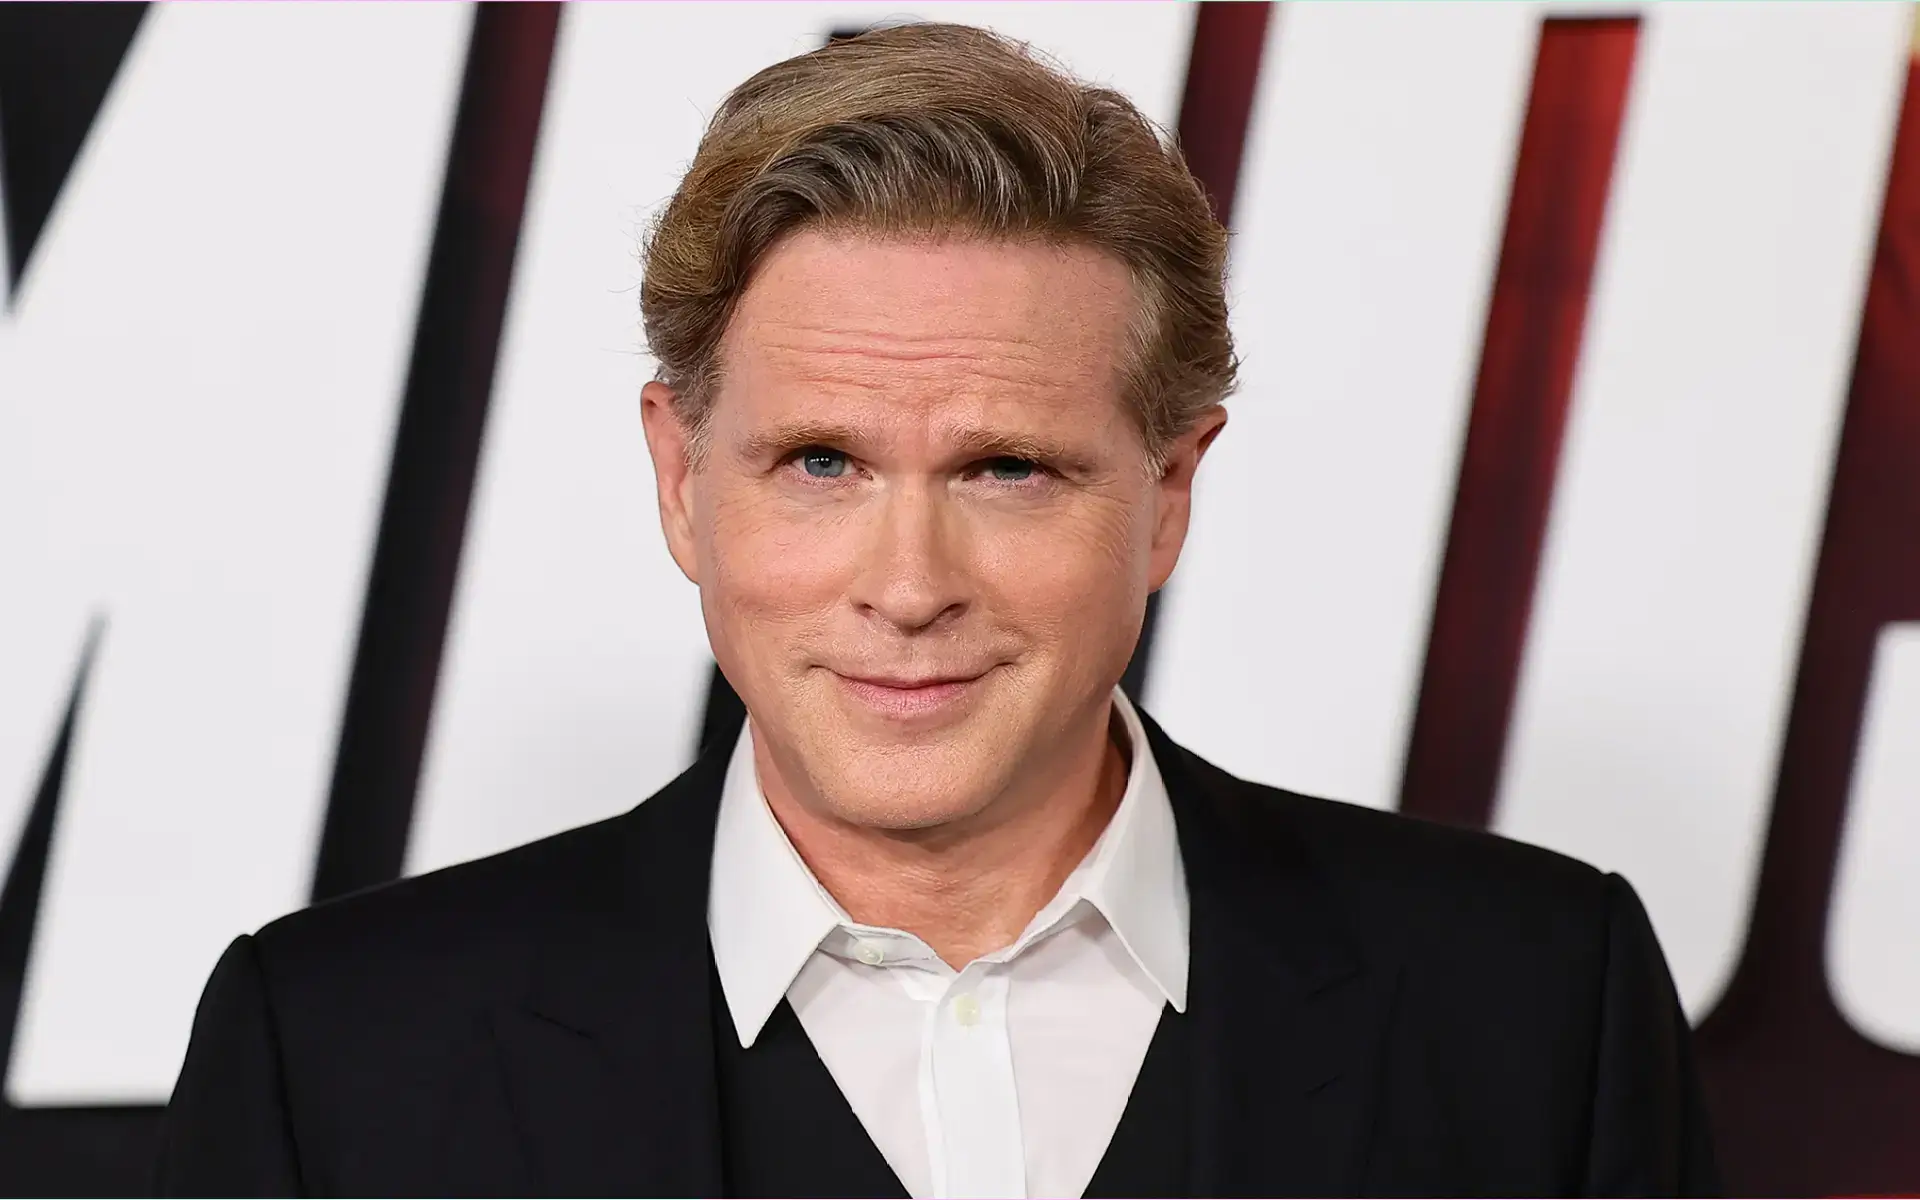 $100k in Valuables Stolen From ‘Princess Bride’ Star Cary Elwes’ Home